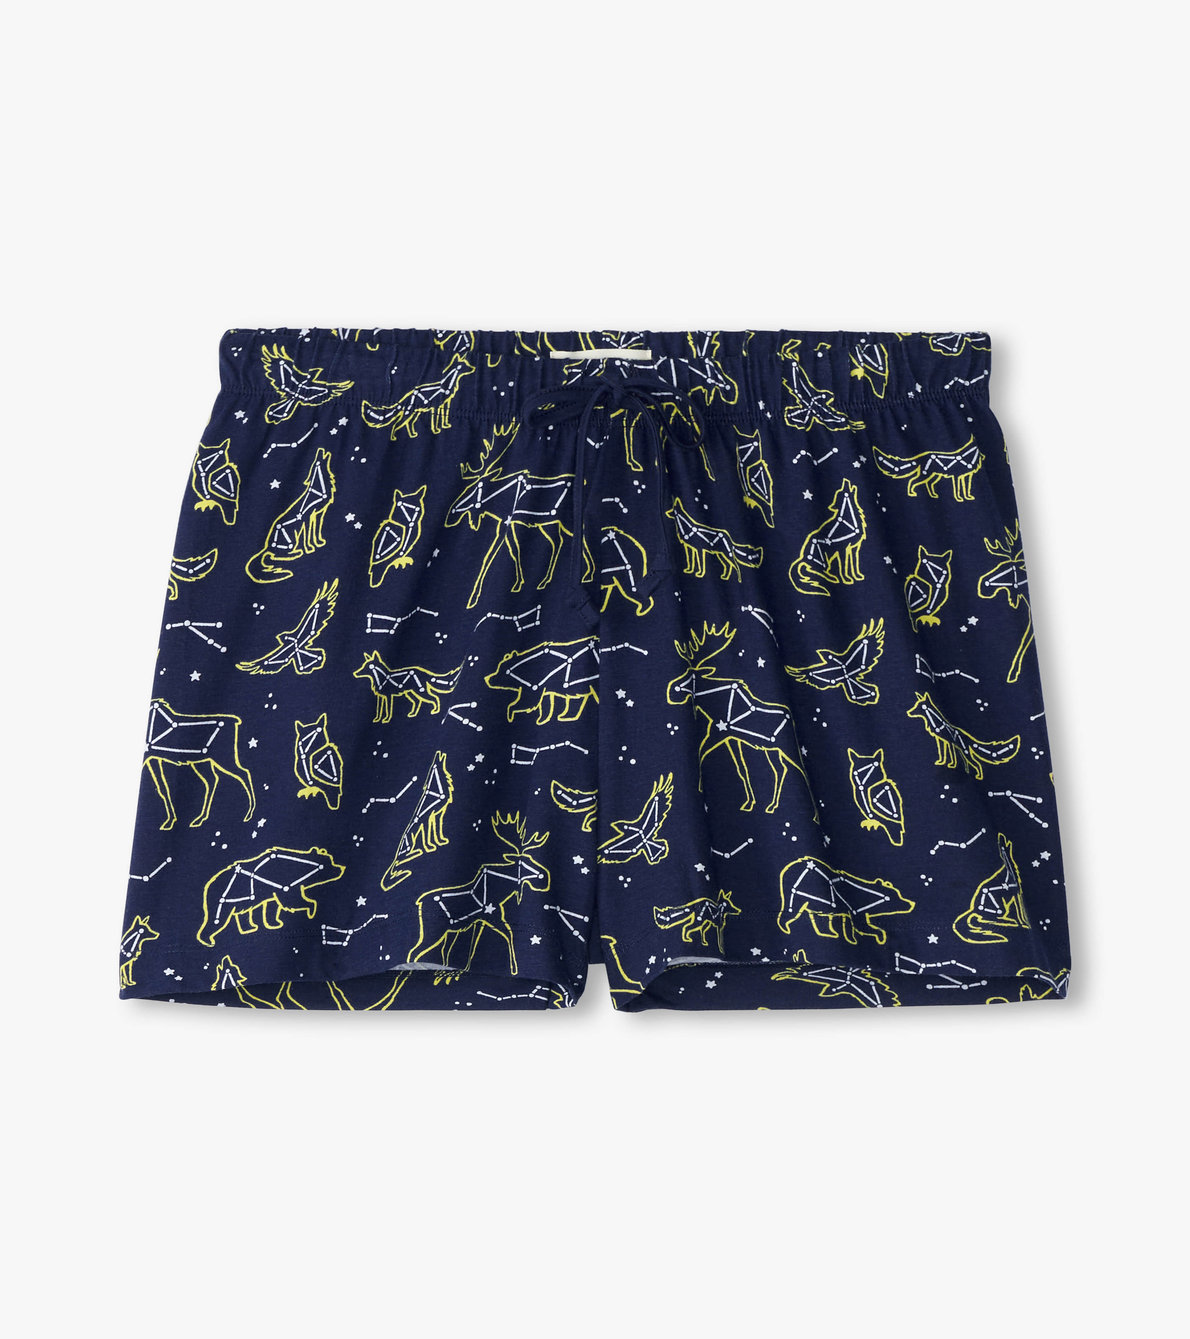 View larger image of Animal Constellations Women's Sleep Shorts